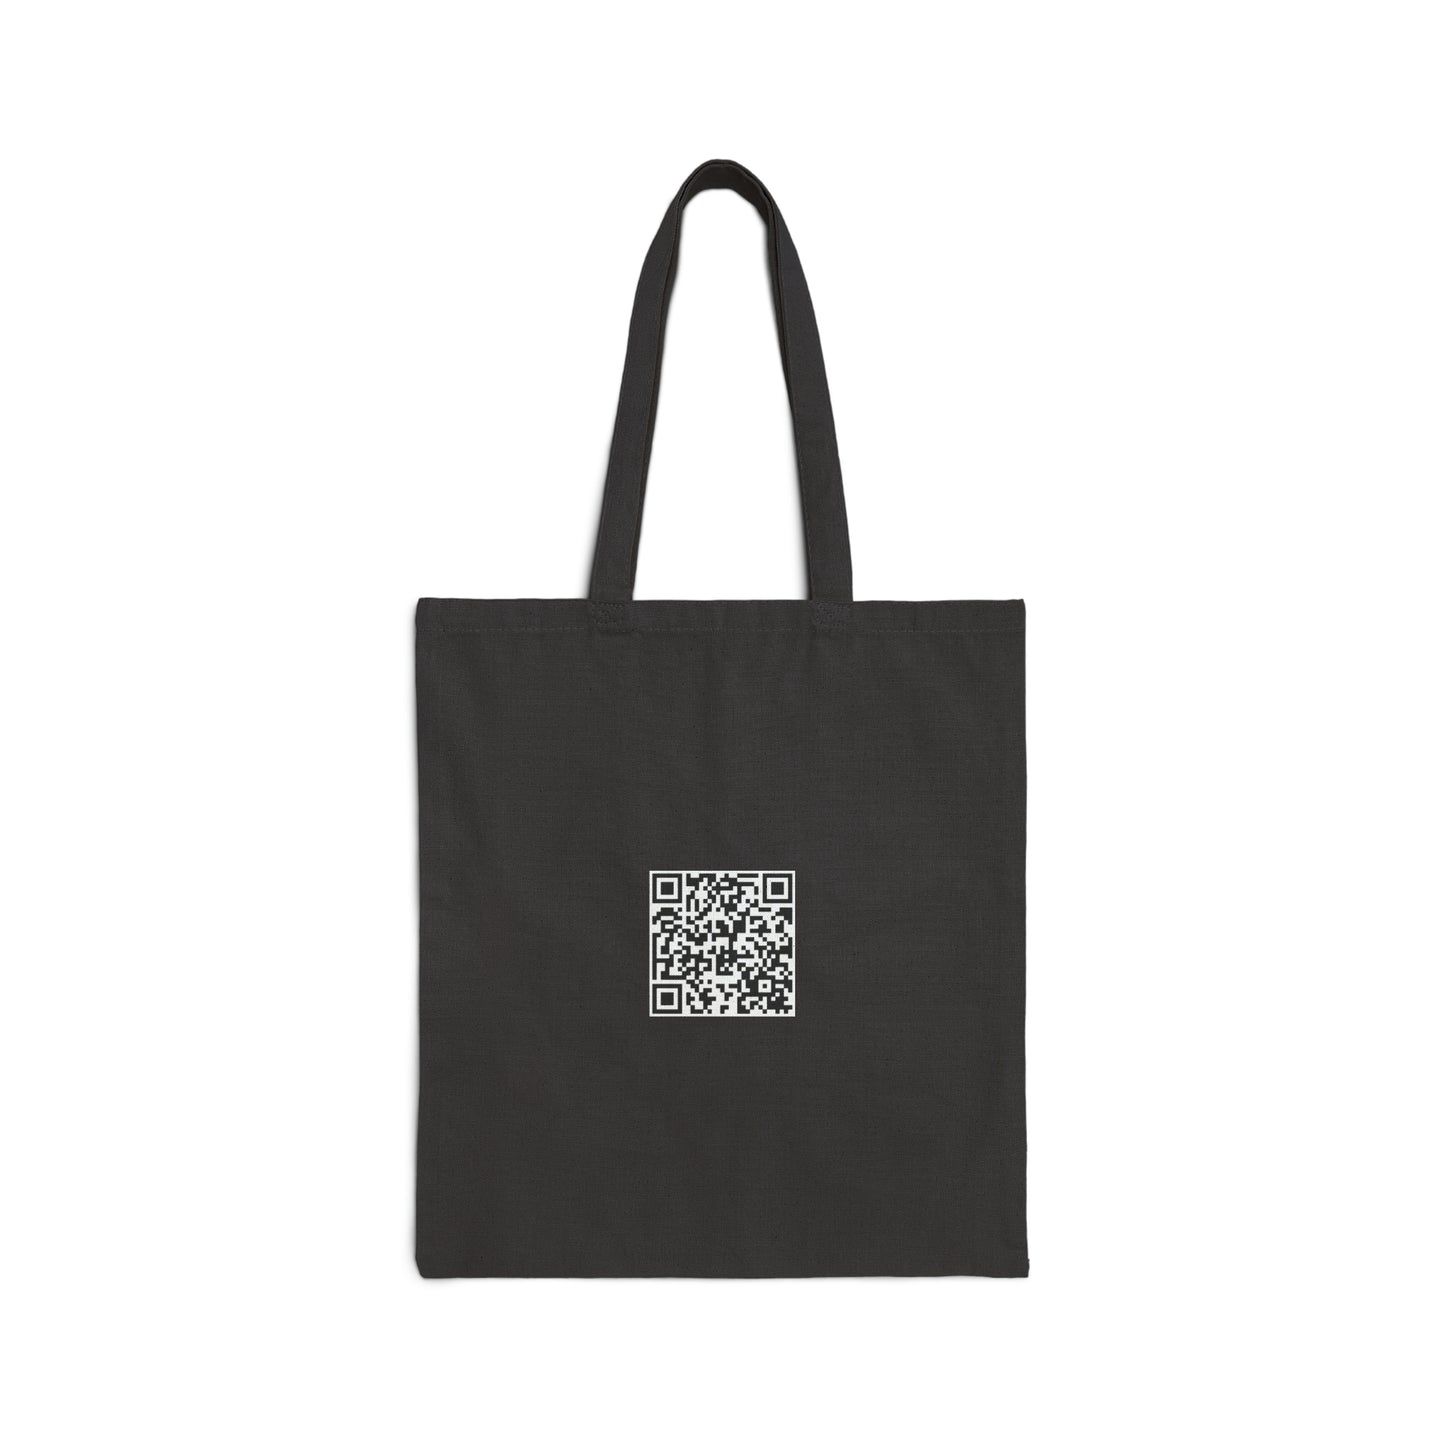 The Four Emperors - Cotton Canvas Tote Bag